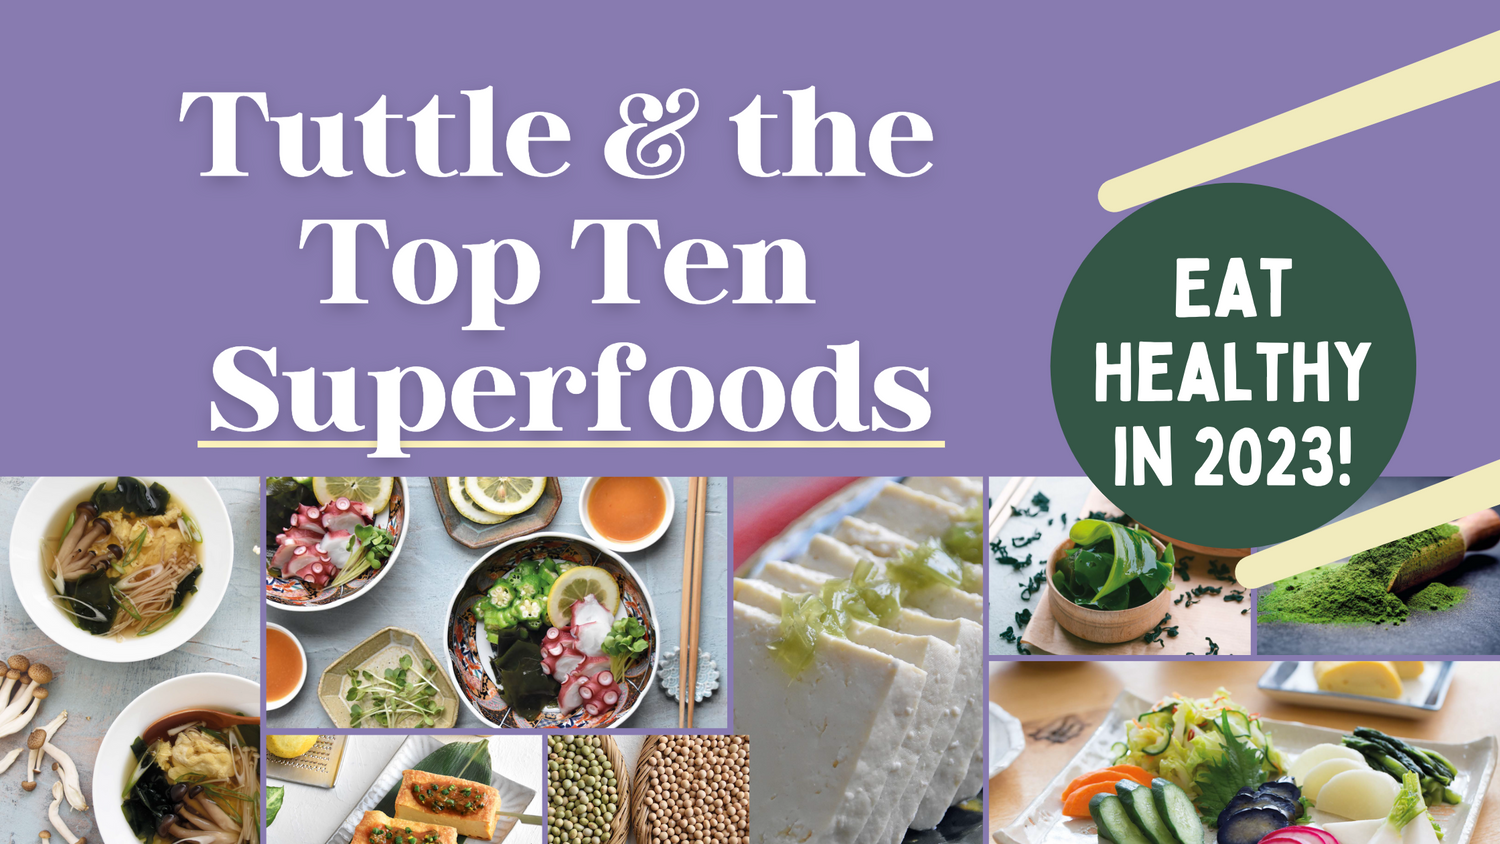 Tuttle and the Top Ten Superfoods - Eat Healthy in 2023!